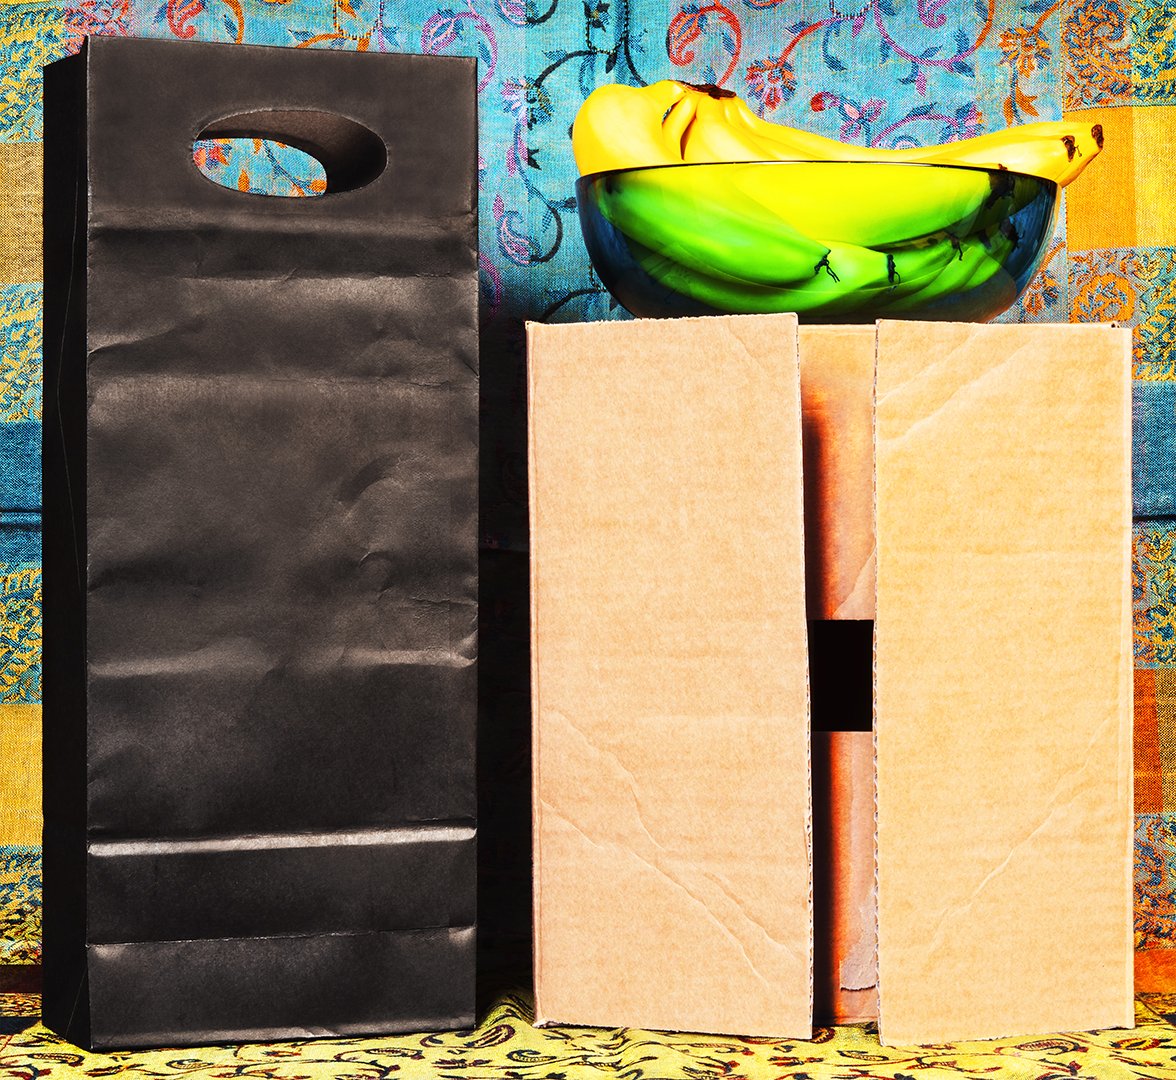    Chance Encounters    A Wine Bag, A Wine Box  &amp; A Bowl of Bananas  2023 90cm x 98cm Archival pigment print  on 310gsm cotton rag  